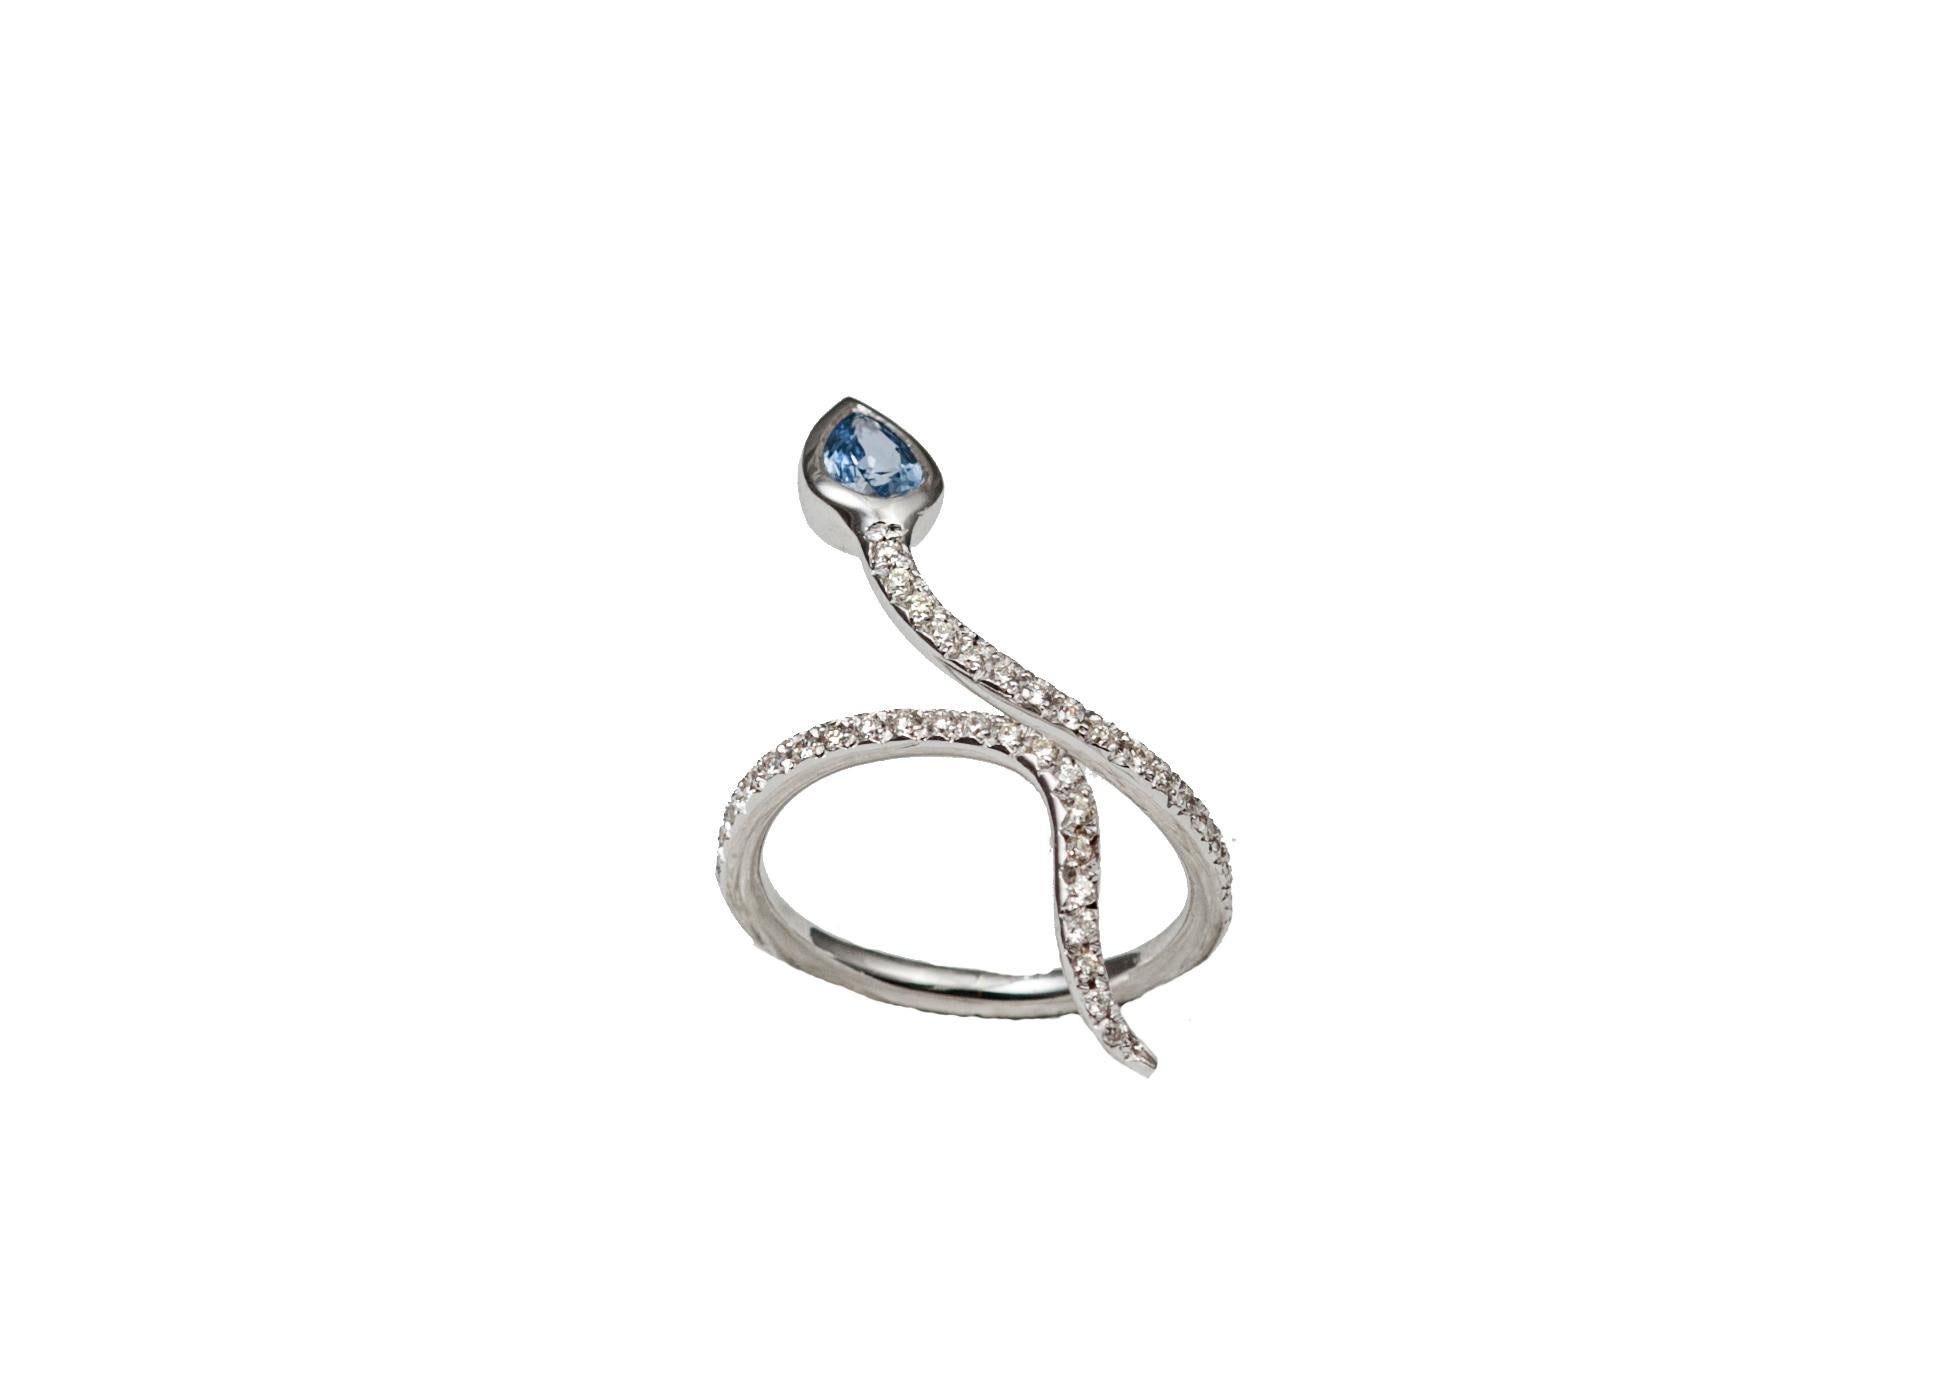 White gold snakes ring with diamonds and sapphire.

Composition: 
Gold 4,45 gr (18K)
37 diamonds 0,28 ct,
1 sapphire 0,49 ct 

Size is adjustable from 6 US to 7 US ( italian size from 12 to 13 )
Other sizes on demand, working time approx 15 days.